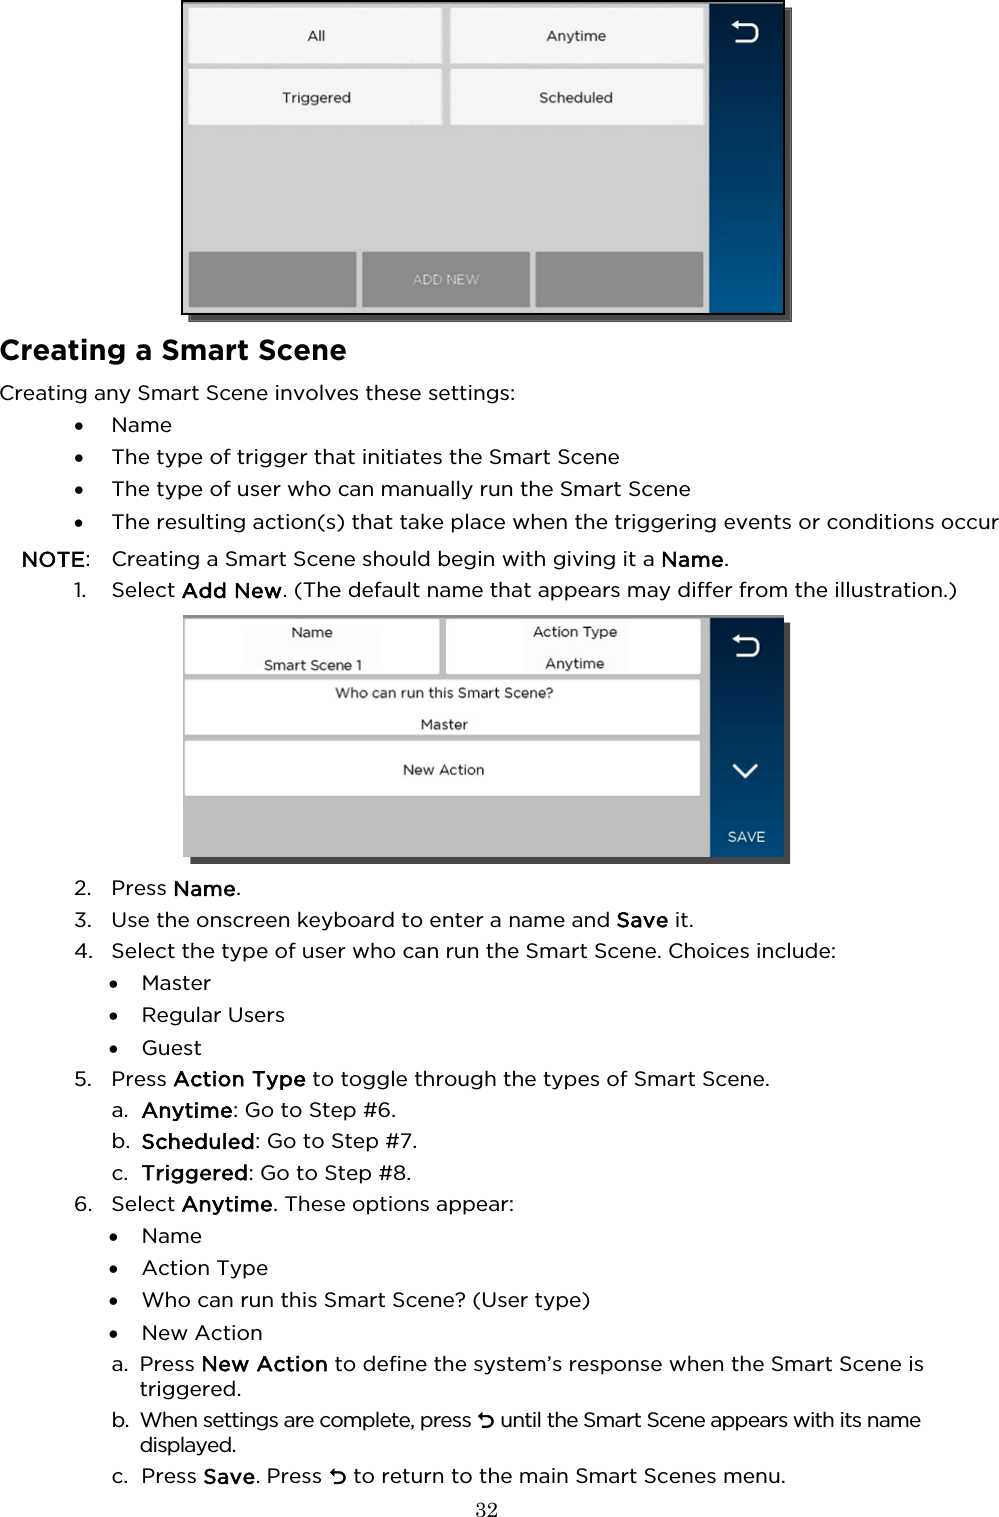  32    Creating a Smart Scene Creating any Smart Scene involves these settings: • Name • The type of trigger that initiates the Smart Scene • The type of user who can manually run the Smart Scene • The resulting action(s) that take place when the triggering events or conditions occur NOTE:  Creating a Smart Scene should begin with giving it a Name. 1. Select Add New. (The default name that appears may differ from the illustration.)  2. Press Name.  3. Use the onscreen keyboard to enter a name and Save it.  4. Select the type of user who can run the Smart Scene. Choices include: • Master • Regular Users • Guest 5. Press Action Type to toggle through the types of Smart Scene. a. Anytime: Go to Step #6. b. Scheduled: Go to Step #7. c. Triggered: Go to Step #8. 6. Select Anytime. These options appear: • Name  • Action Type • Who can run this Smart Scene? (User type) • New Action a. Press New Action to define the system’s response when the Smart Scene is triggered. b. When settings are complete, press  until the Smart Scene appears with its name displayed. c. Press Save. Press  to return to the main Smart Scenes menu.  